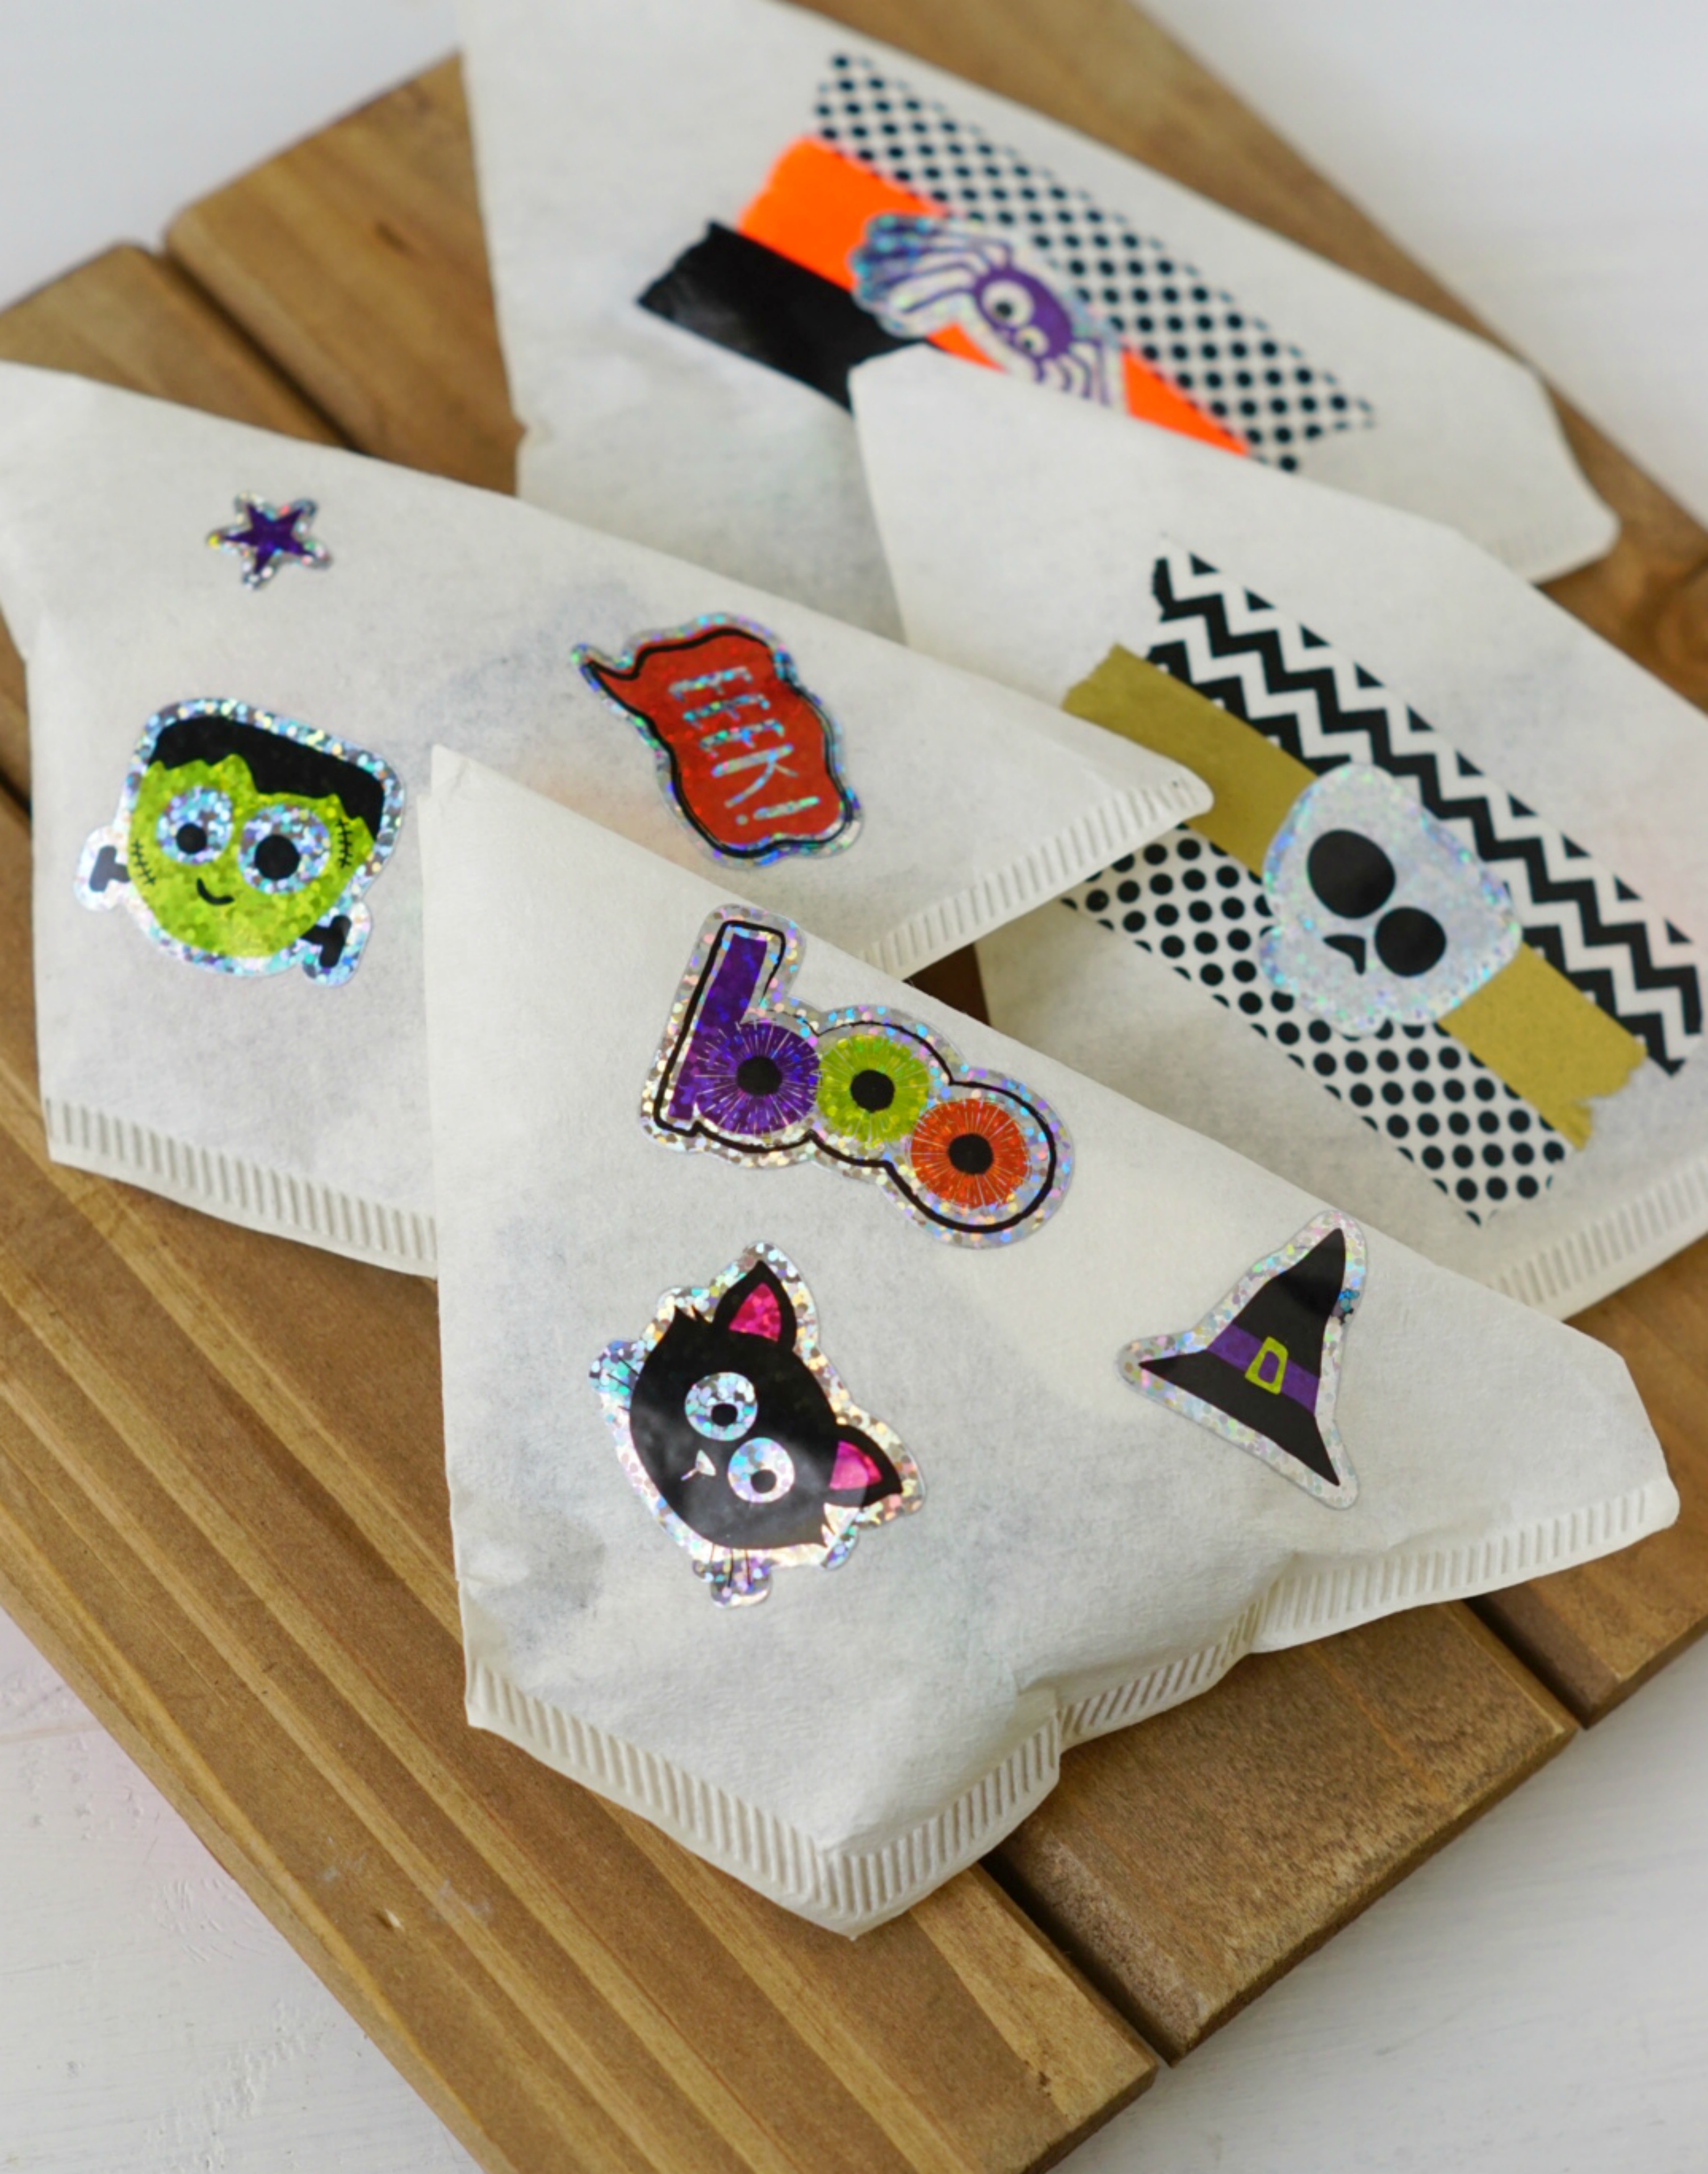 Coffee Filter Halloween Treat Bag and Non Candy Halloween Ideas